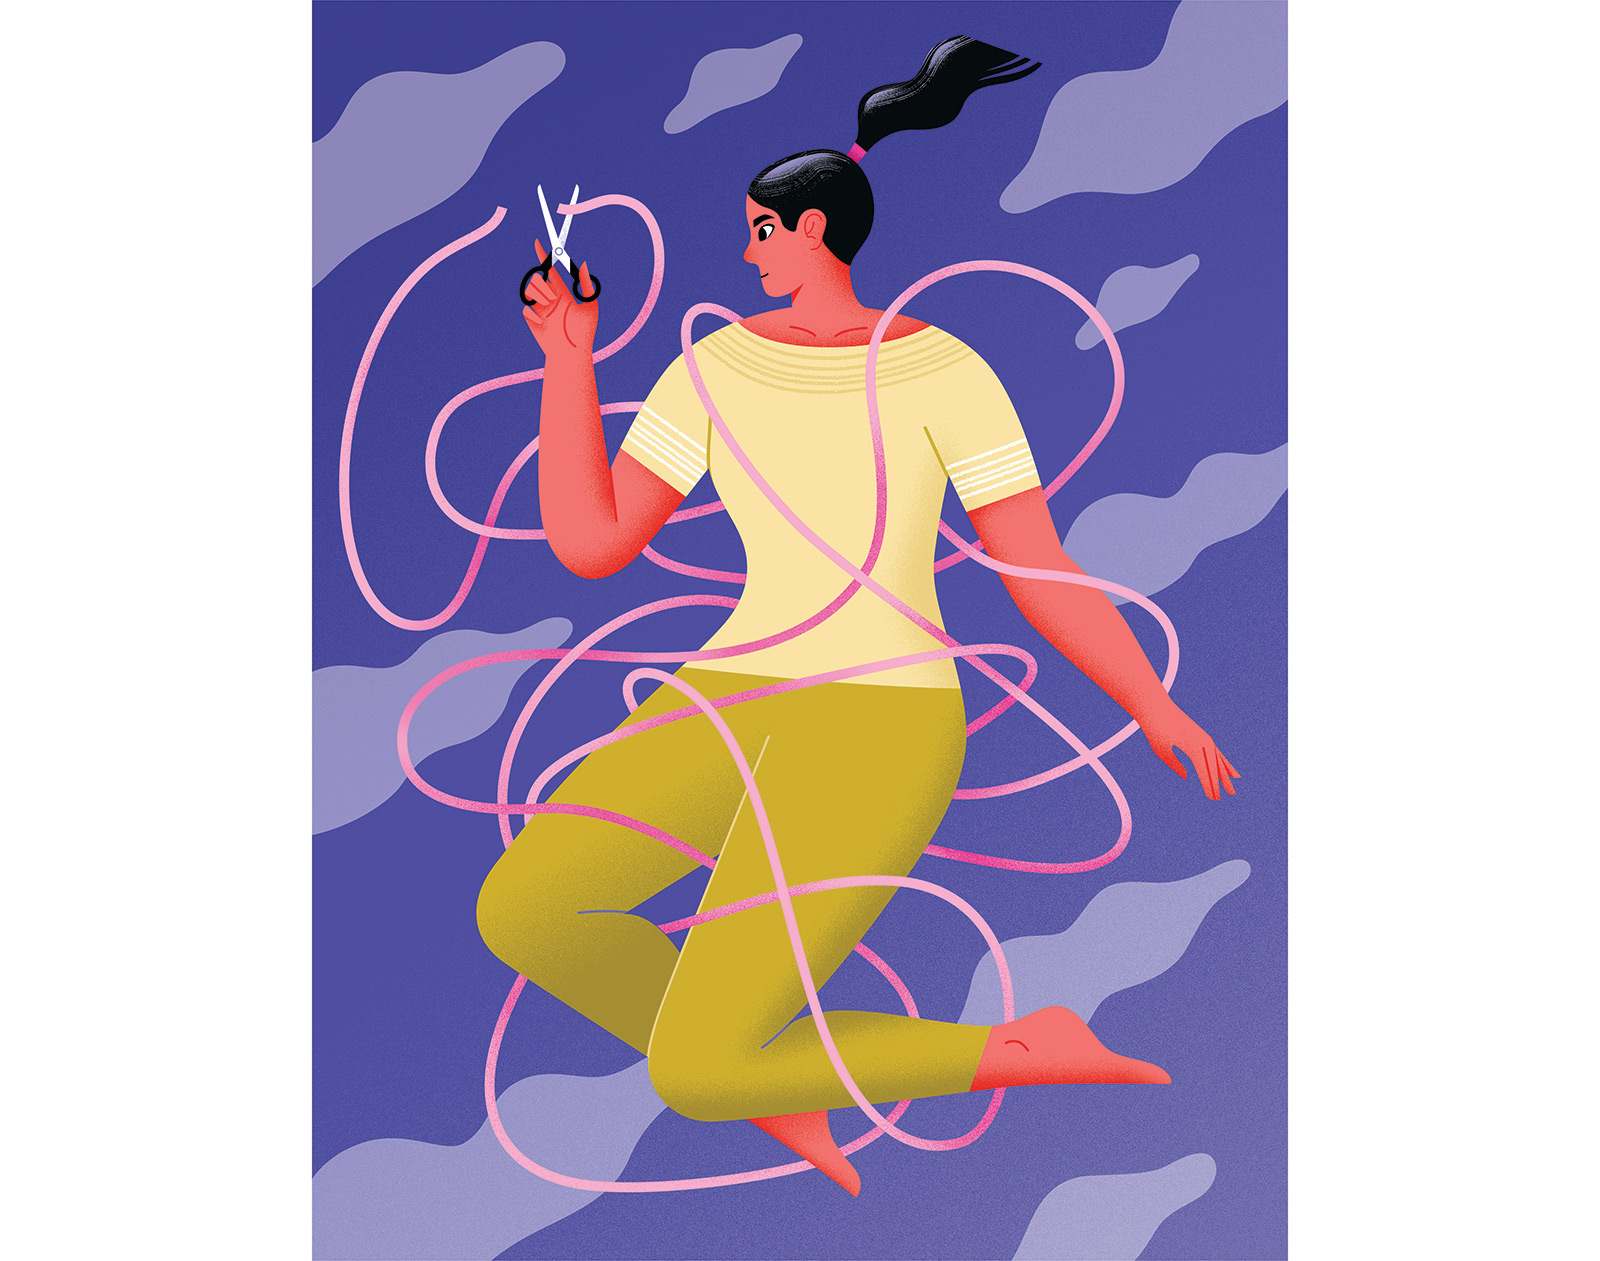 Illustration for Bust magazine about a woman choosing to be childfree